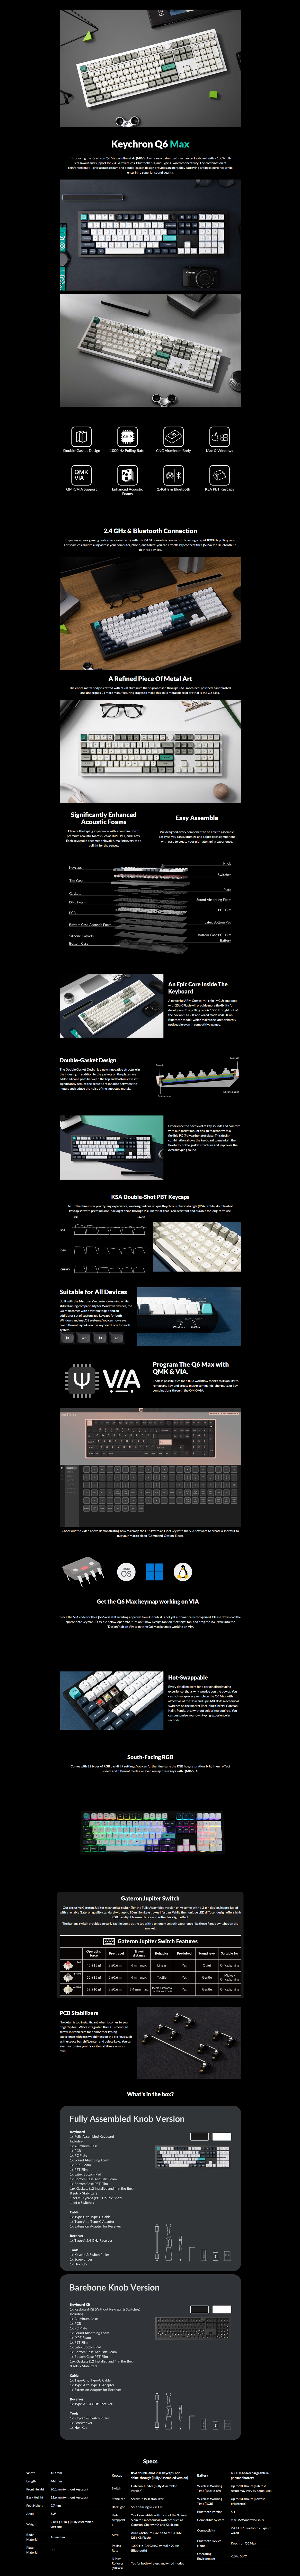 A large marketing image providing additional information about the product Keychron Q6 Max QMK/VIA Wireless Custom Mechanical Keyboard Shell White (Gateron Brown Switch) - Additional alt info not provided